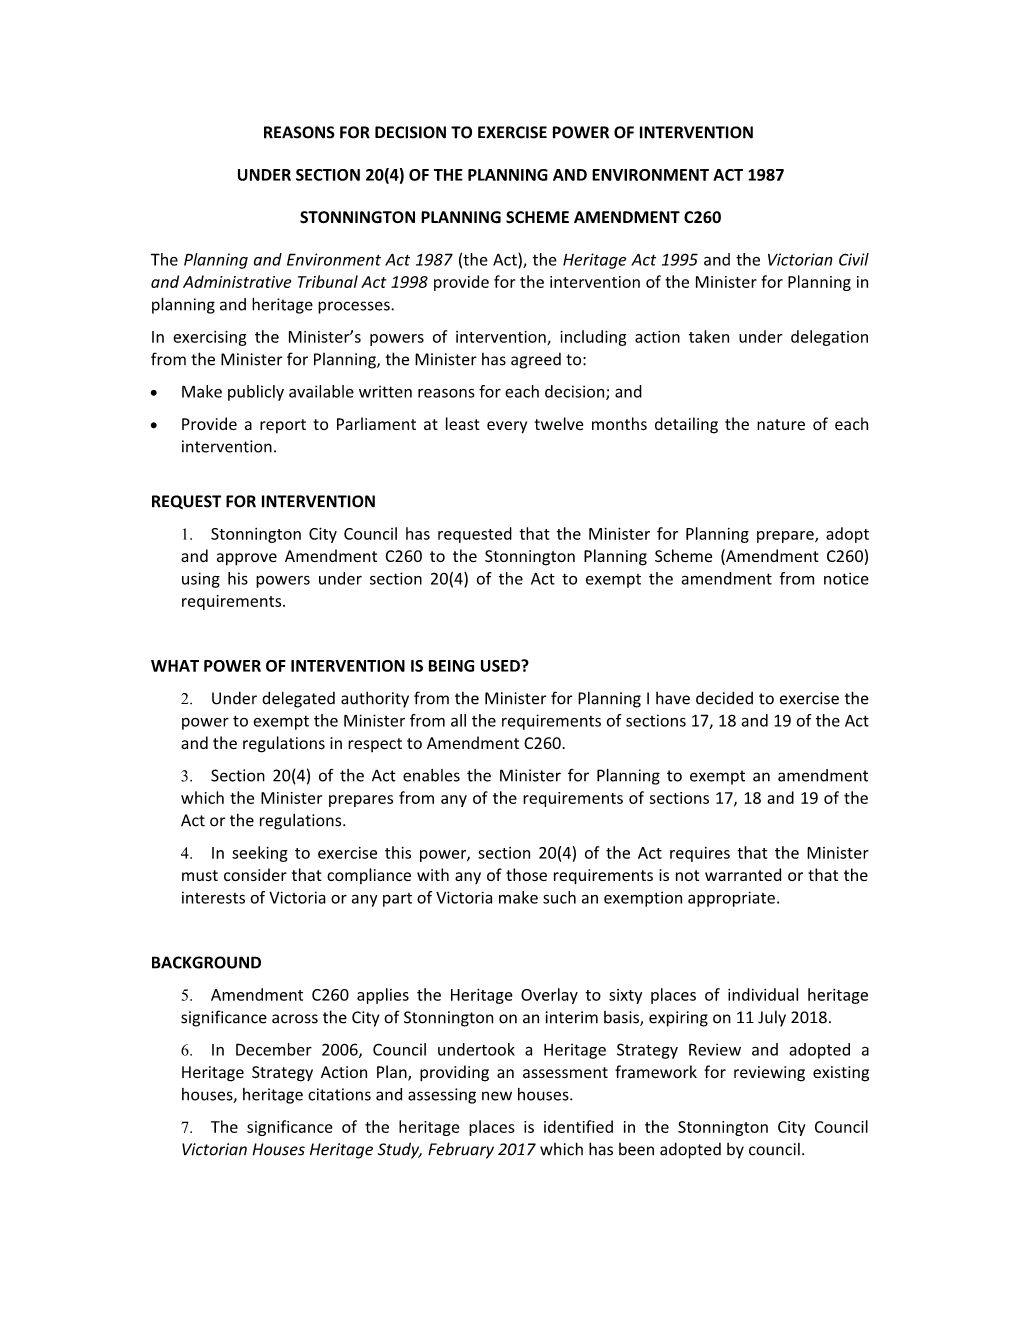 Stonnington C260 Reasons for Intervention APPROVAL FINAL